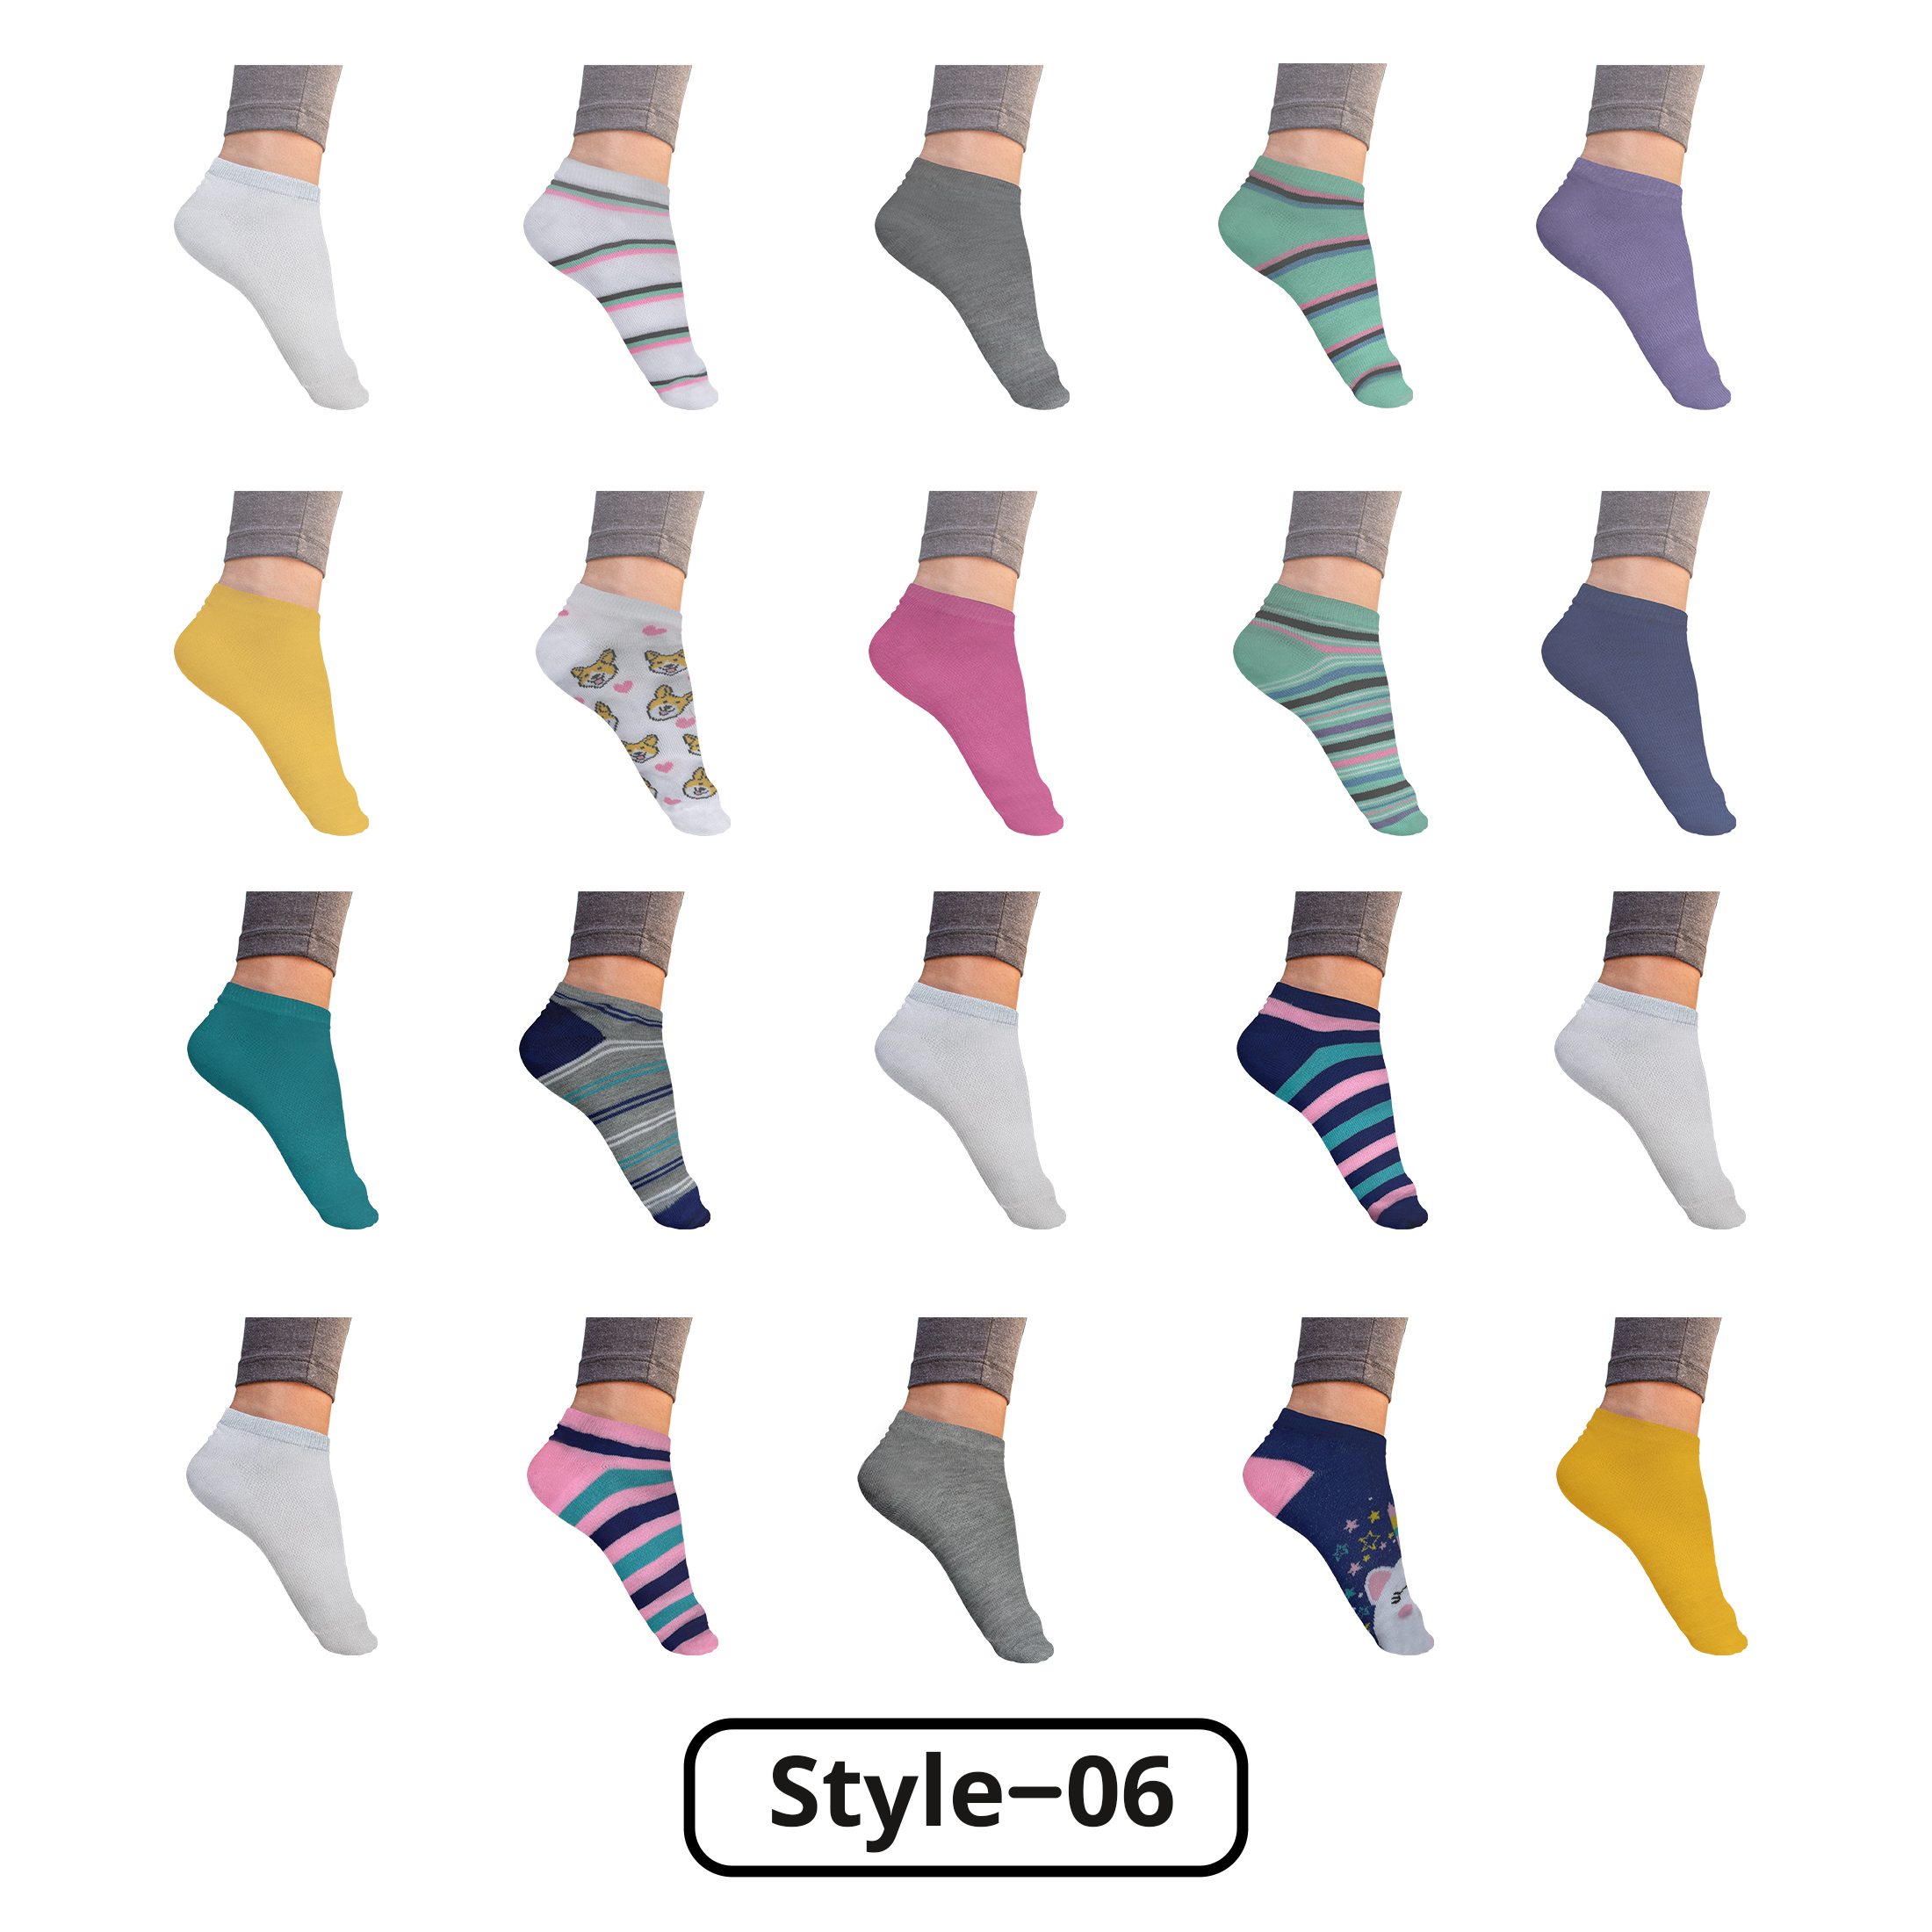 20-Pairs: Women’s Breathable Stylish Colorful Fun No Show Low Cut Ankle Socks - Style 6